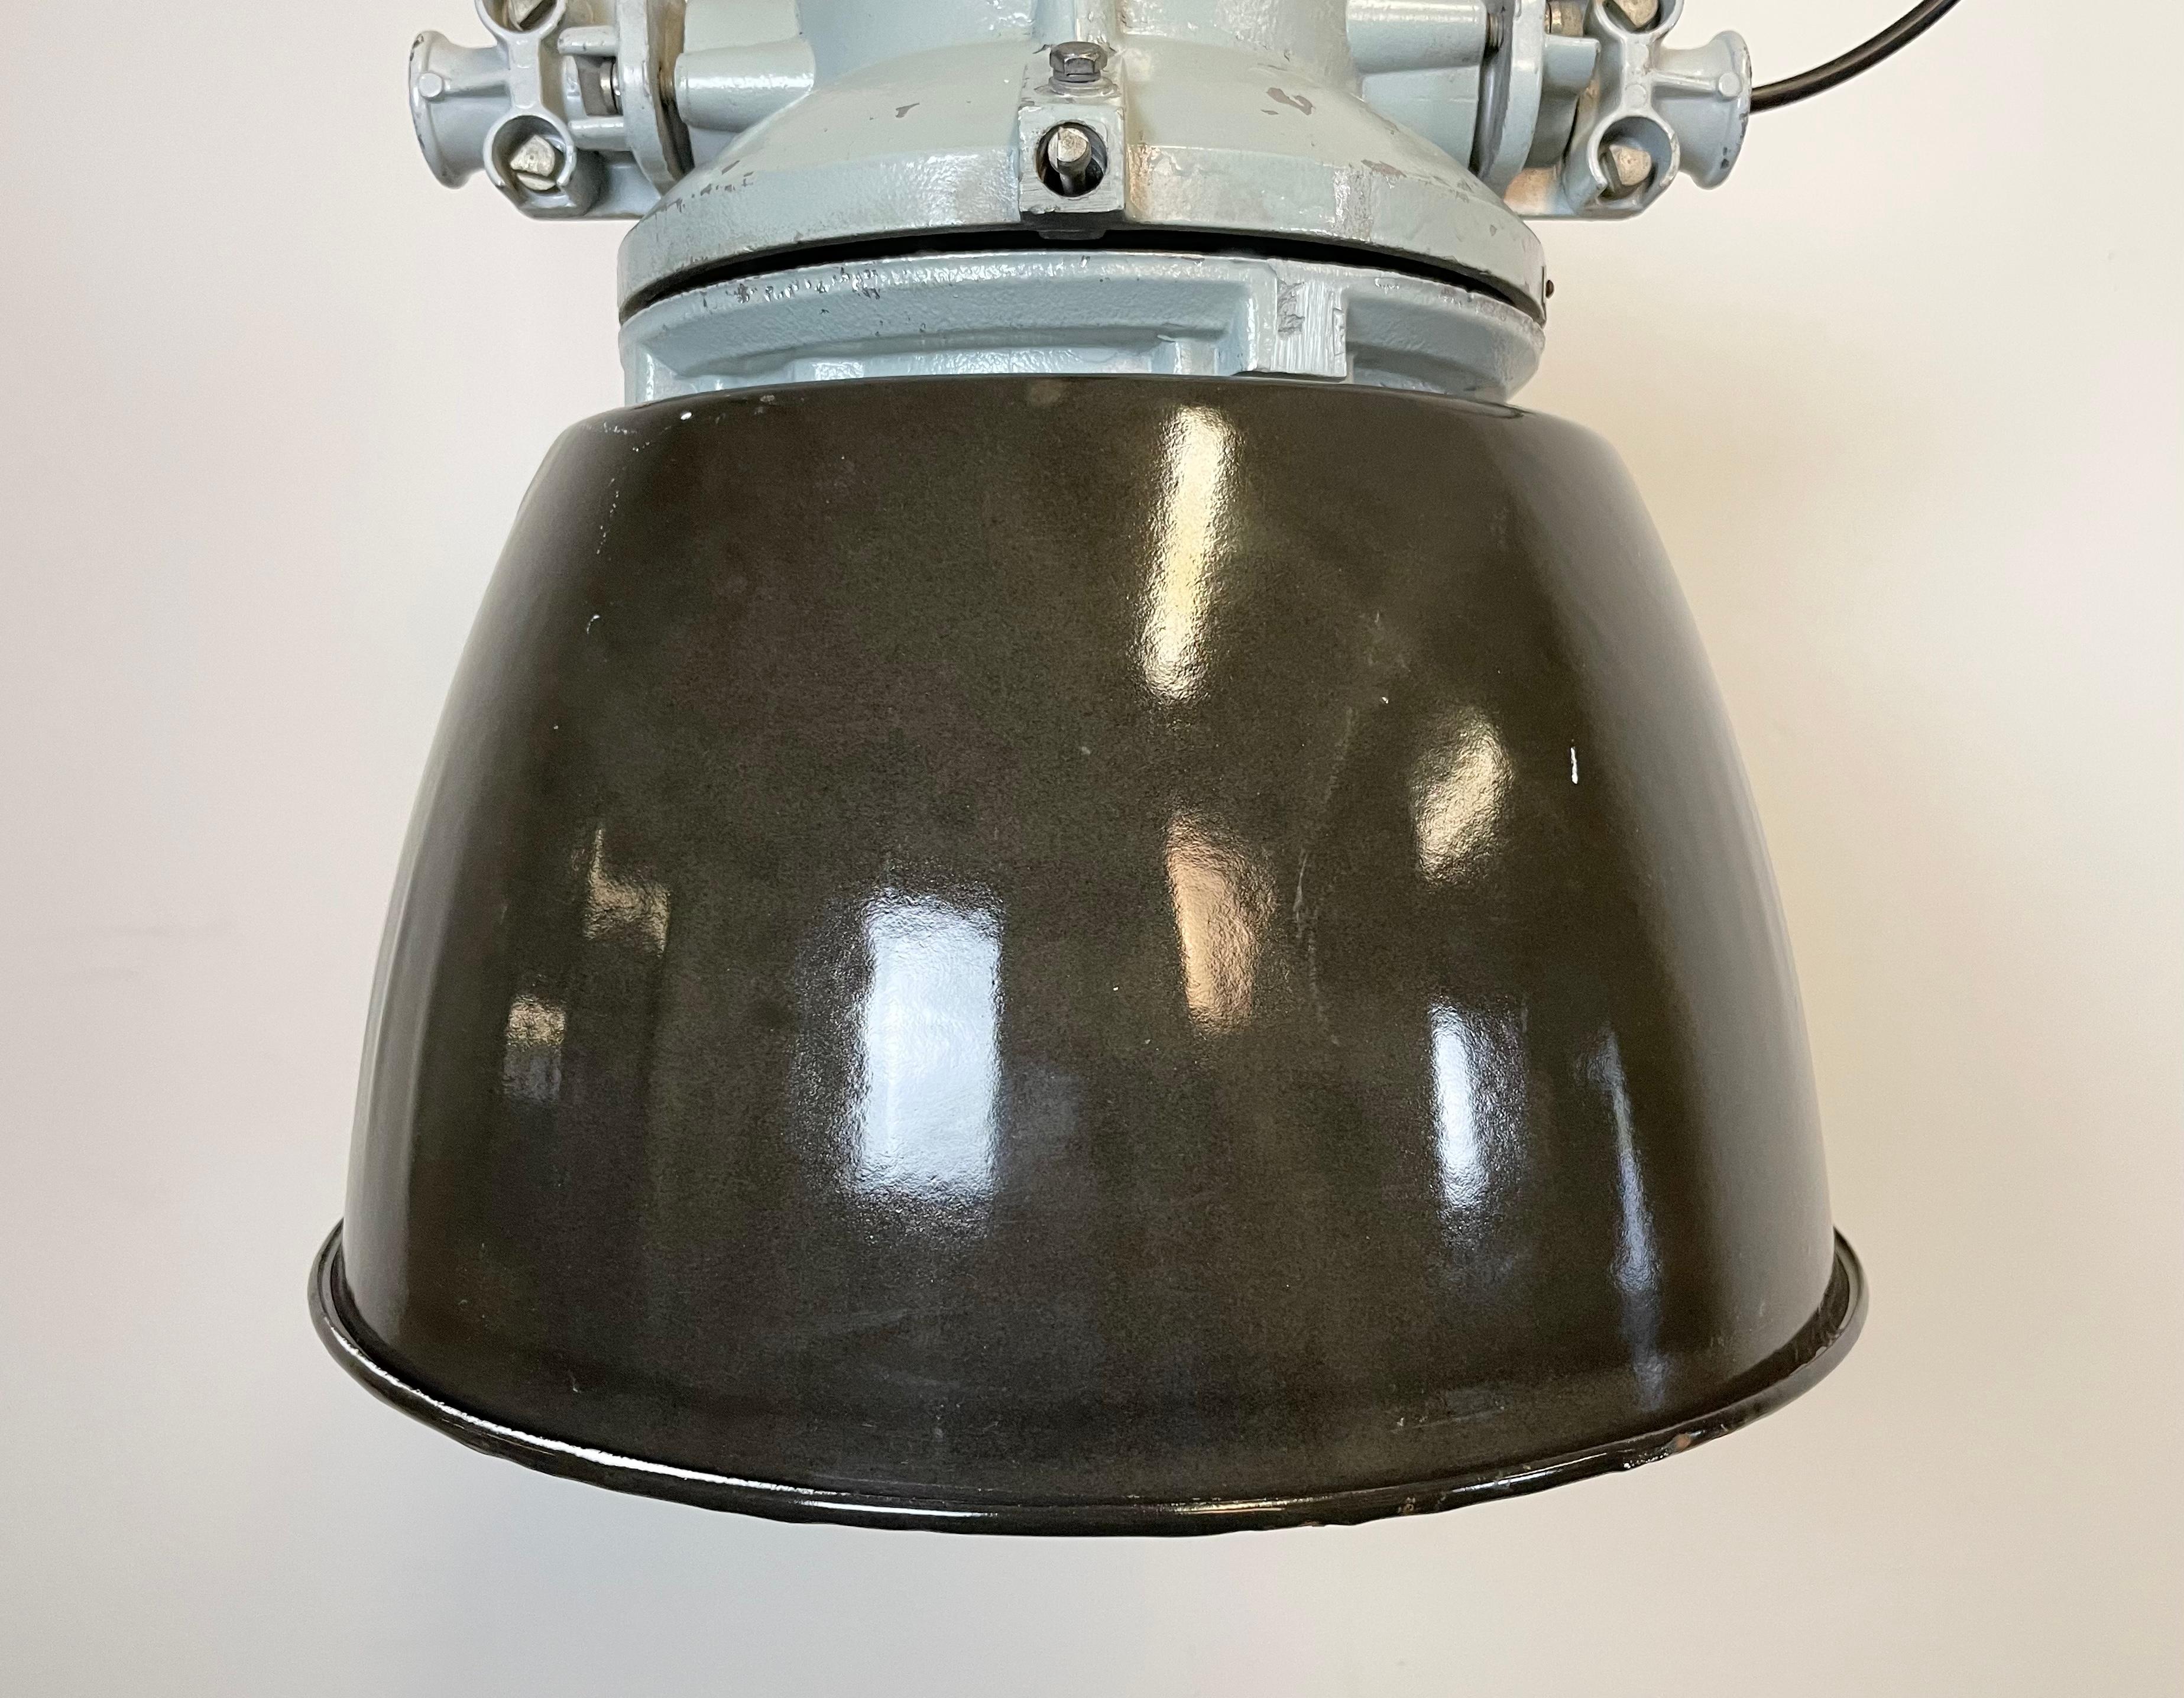 Grey Explosion Proof Lamp with Black Enameled Shade, 1970s For Sale 6